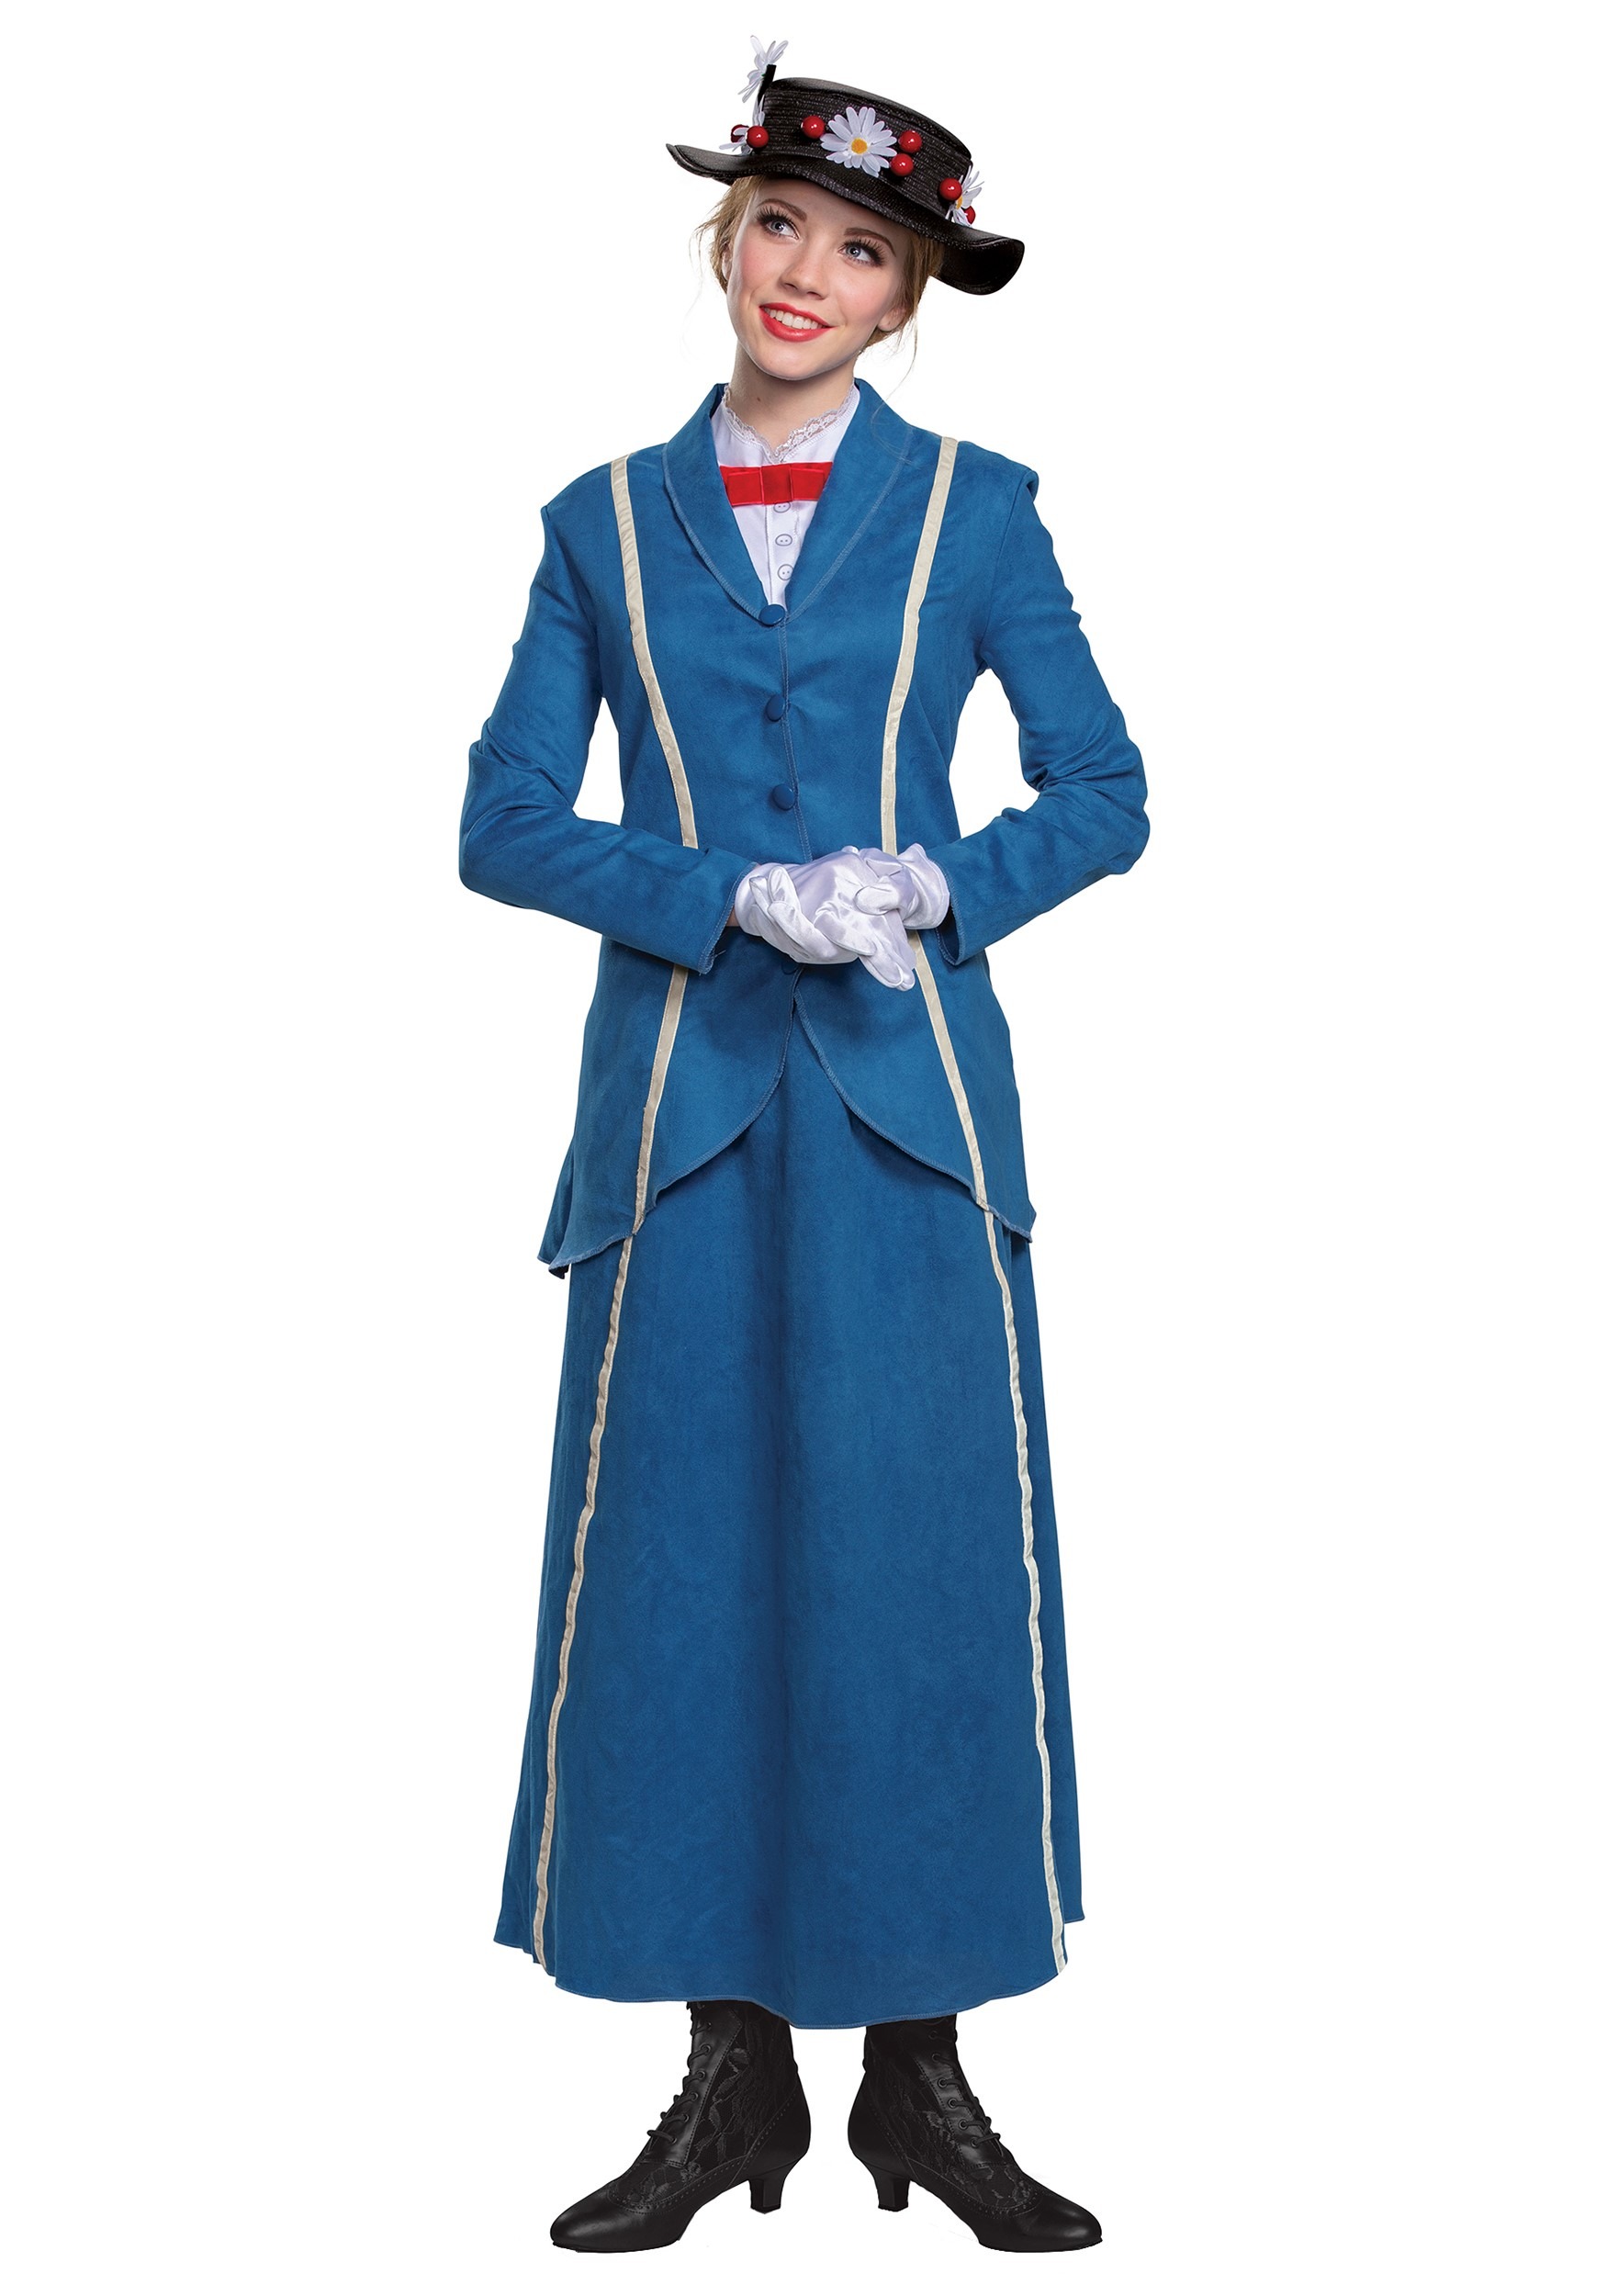 Image of Mary Poppins Women's Blue Coat Costume ID DI91093-XL